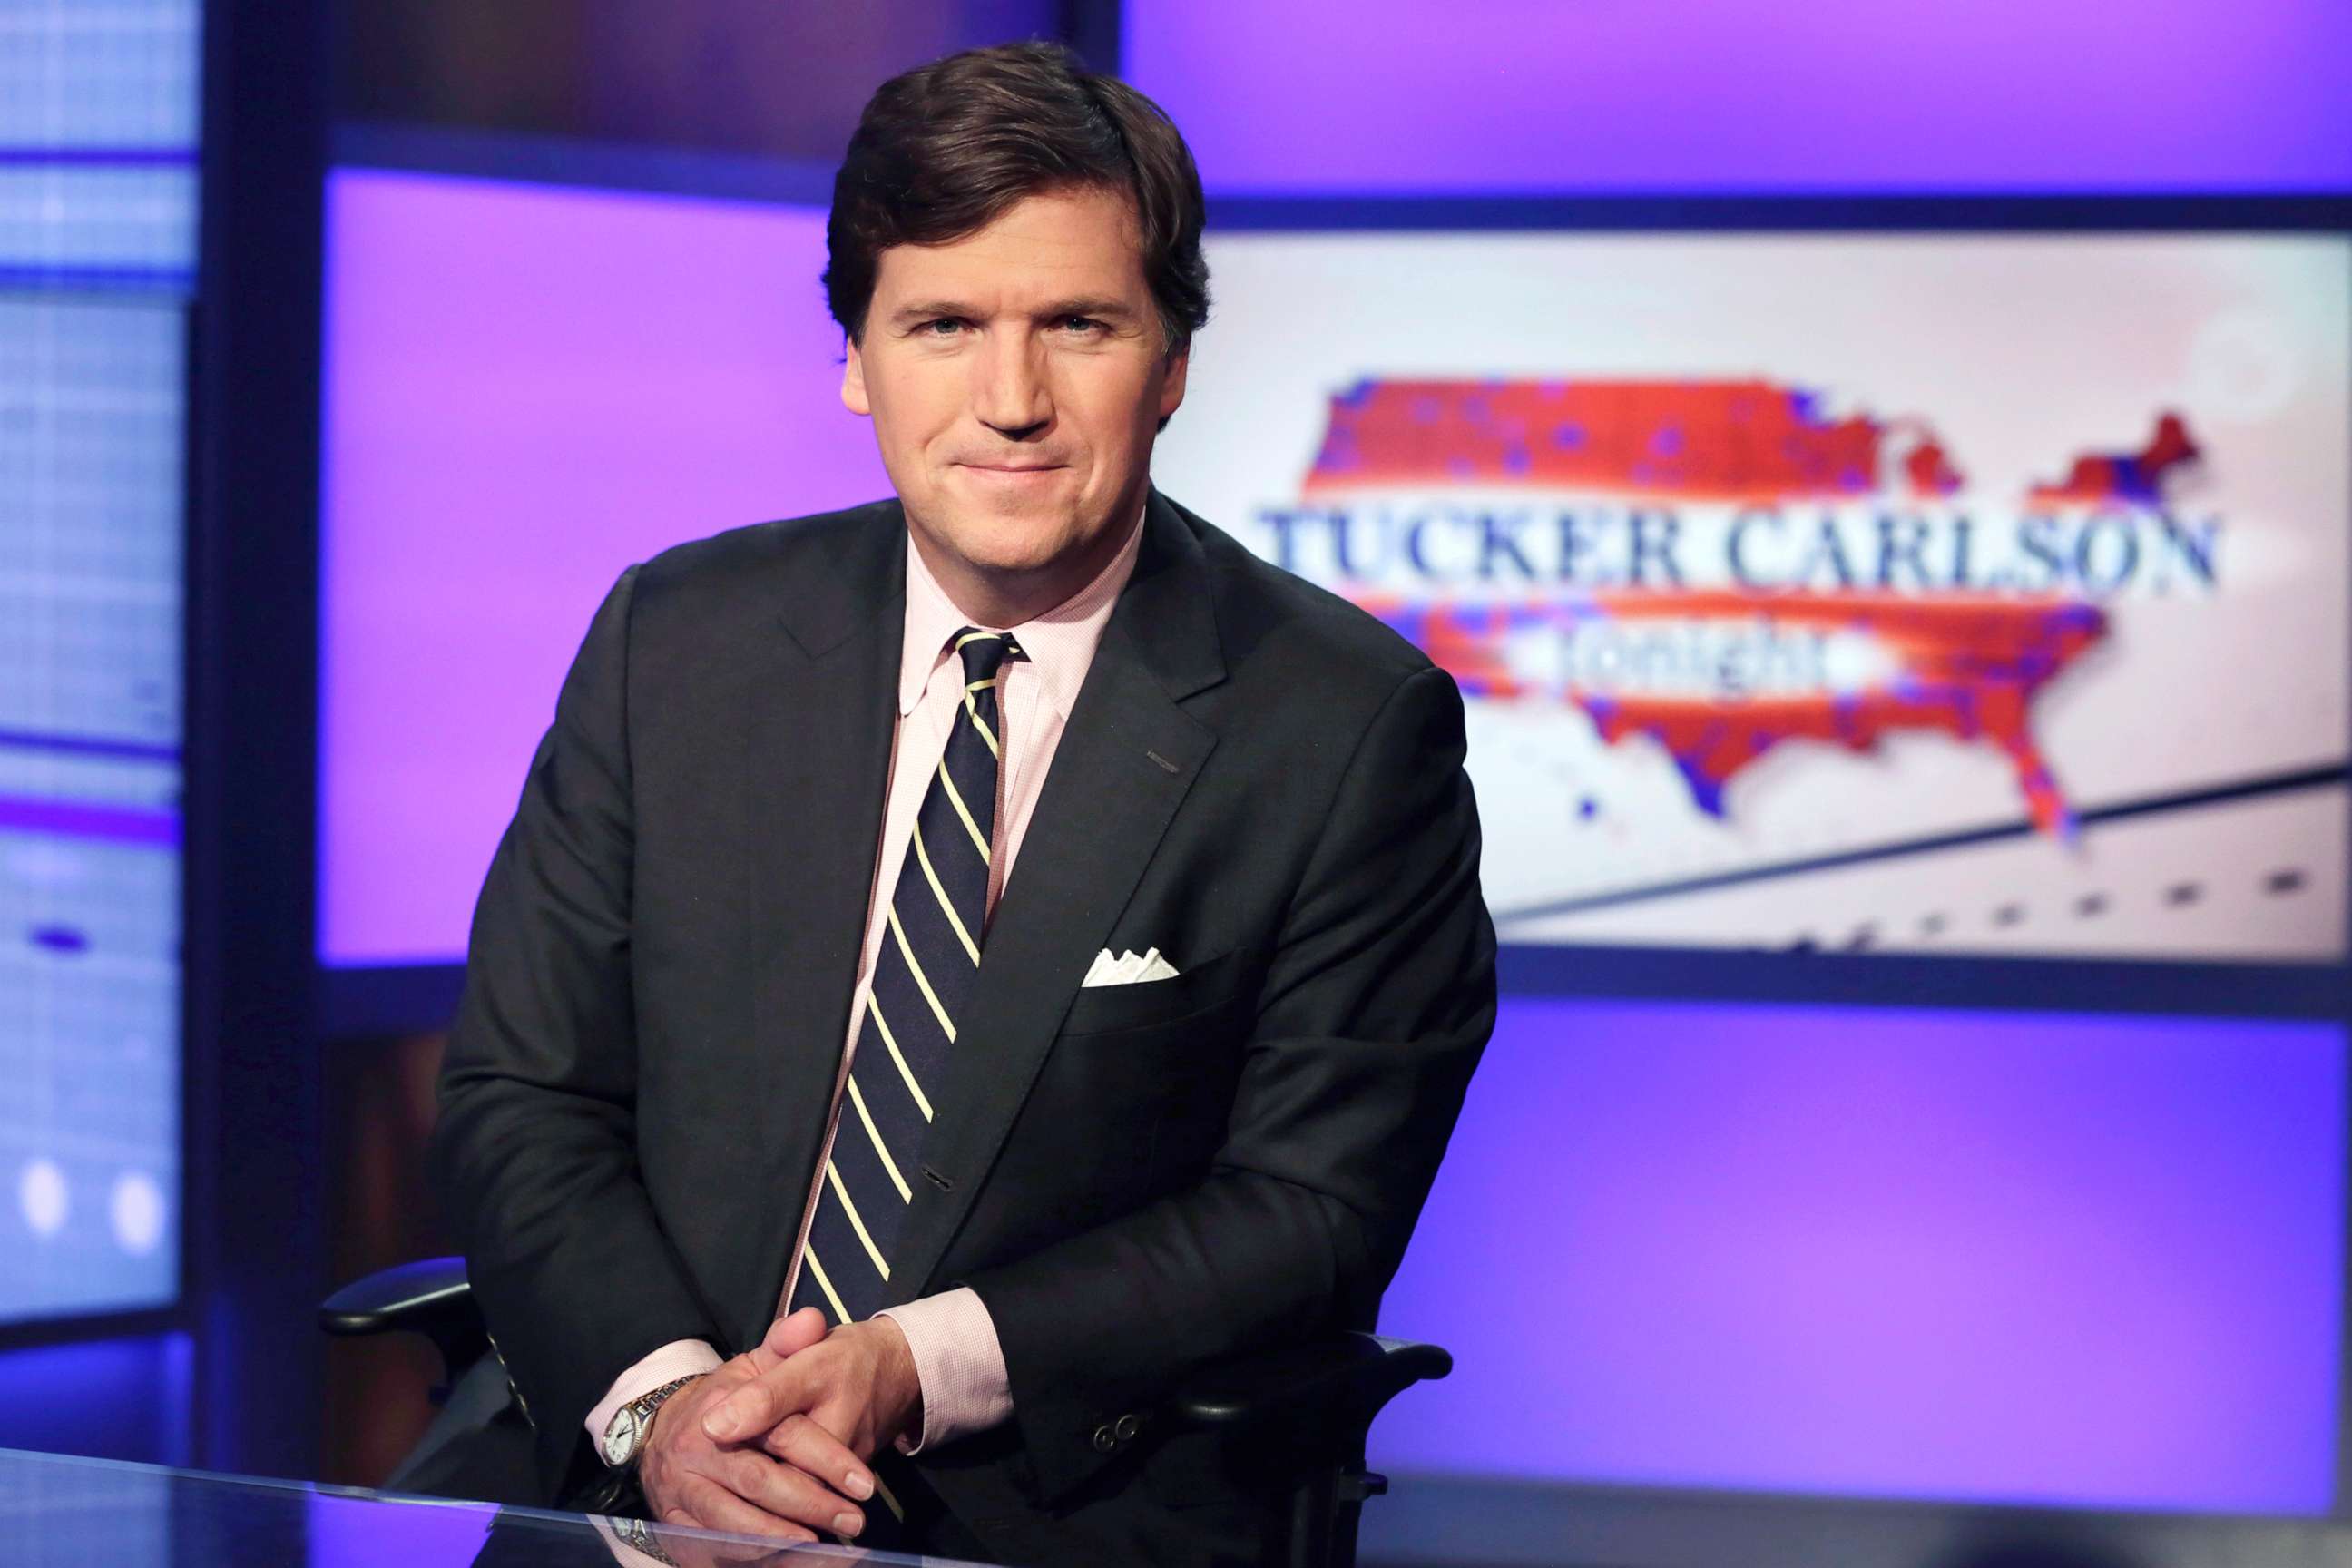 PHOTO: Tucker Carlson, host of "Tucker Carlson Tonight," poses for photos in a Fox News Channel studio on March 2, 2017, in New York.